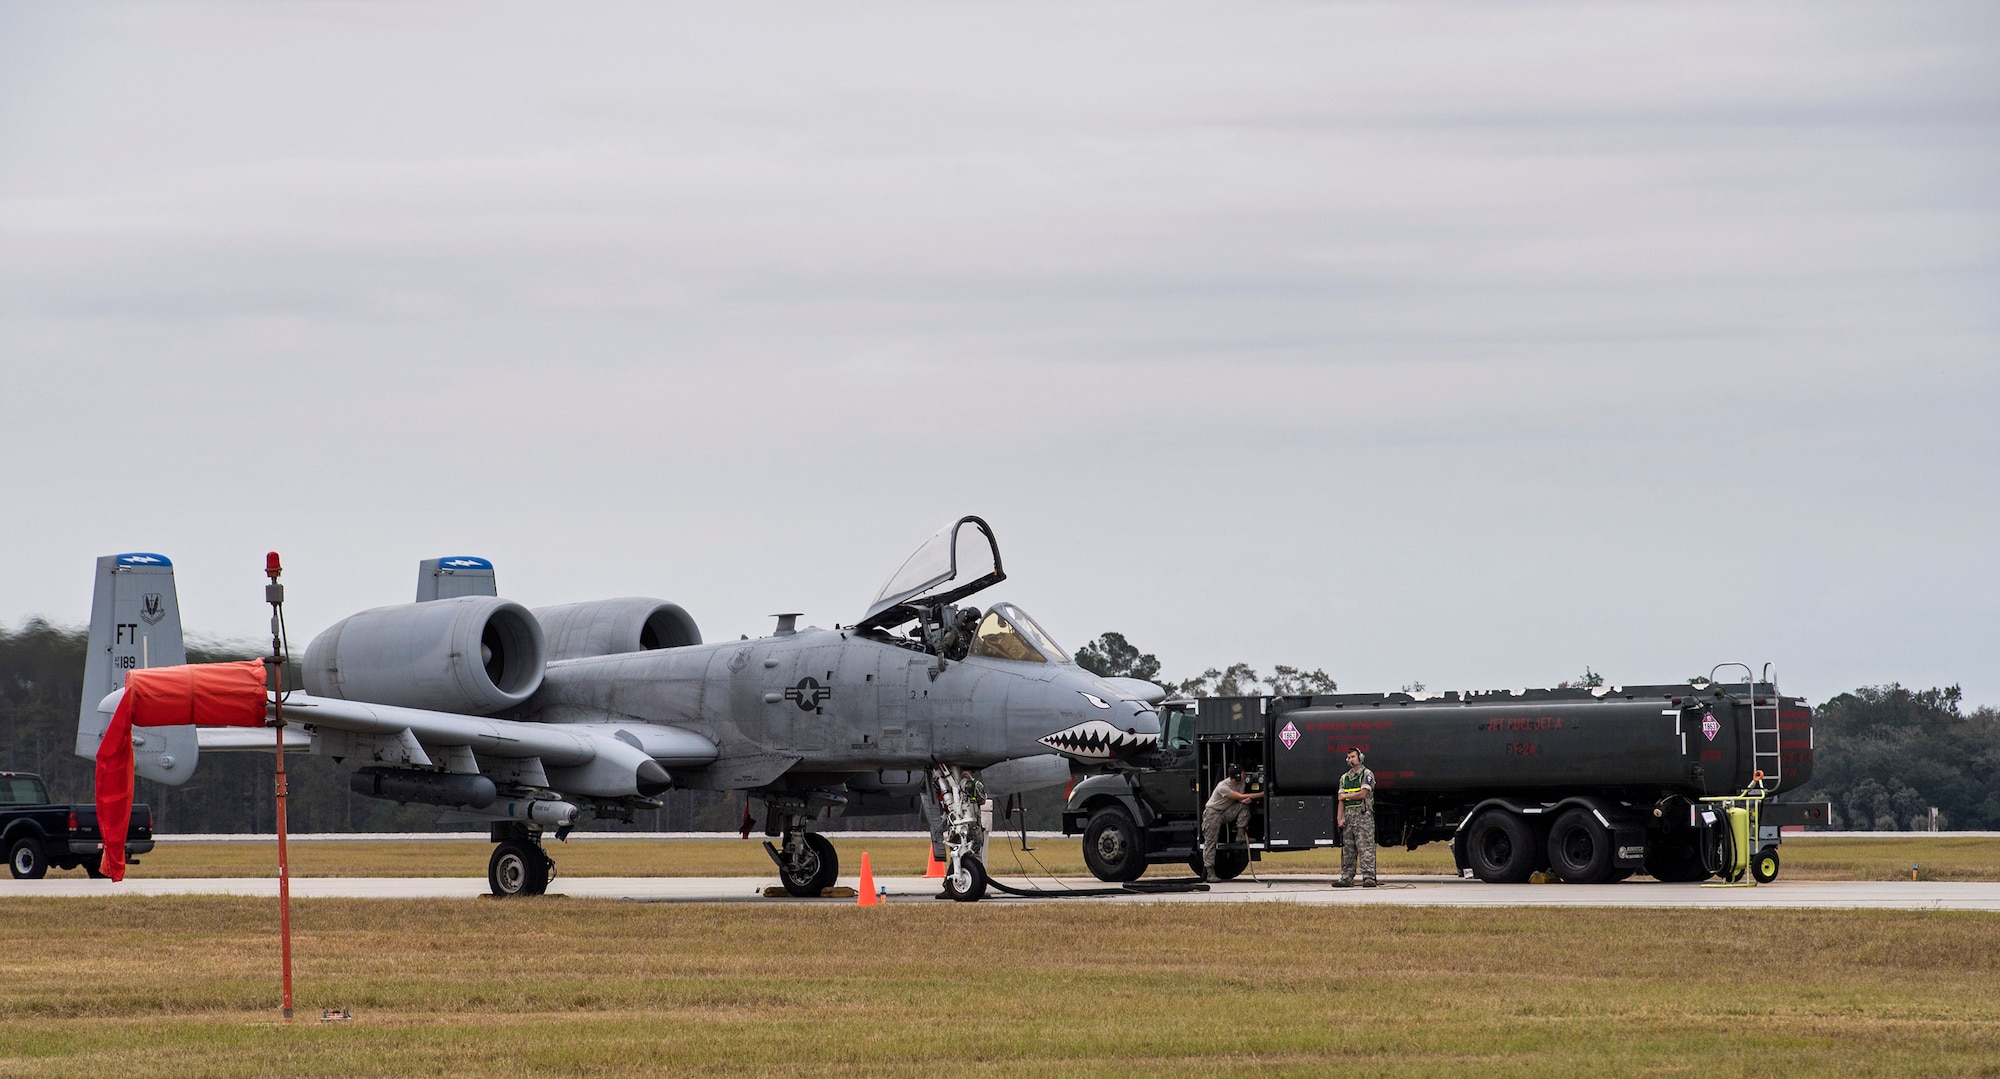 Airmen from the 23d Logistics Readiness Squadron petroleum, oil and lubricants flight perform a hot pit refuel on an A-10C Thunderbolt II, Nov. 9, 2016, at Moody Air Force Base, Ga. This type of refueling decreased the jets down time, which allowed Airmen to meet the surge’s strenuous exercise demands. (U.S. Air Force photo by Airman 1st Class Janiqua P. Robinson)